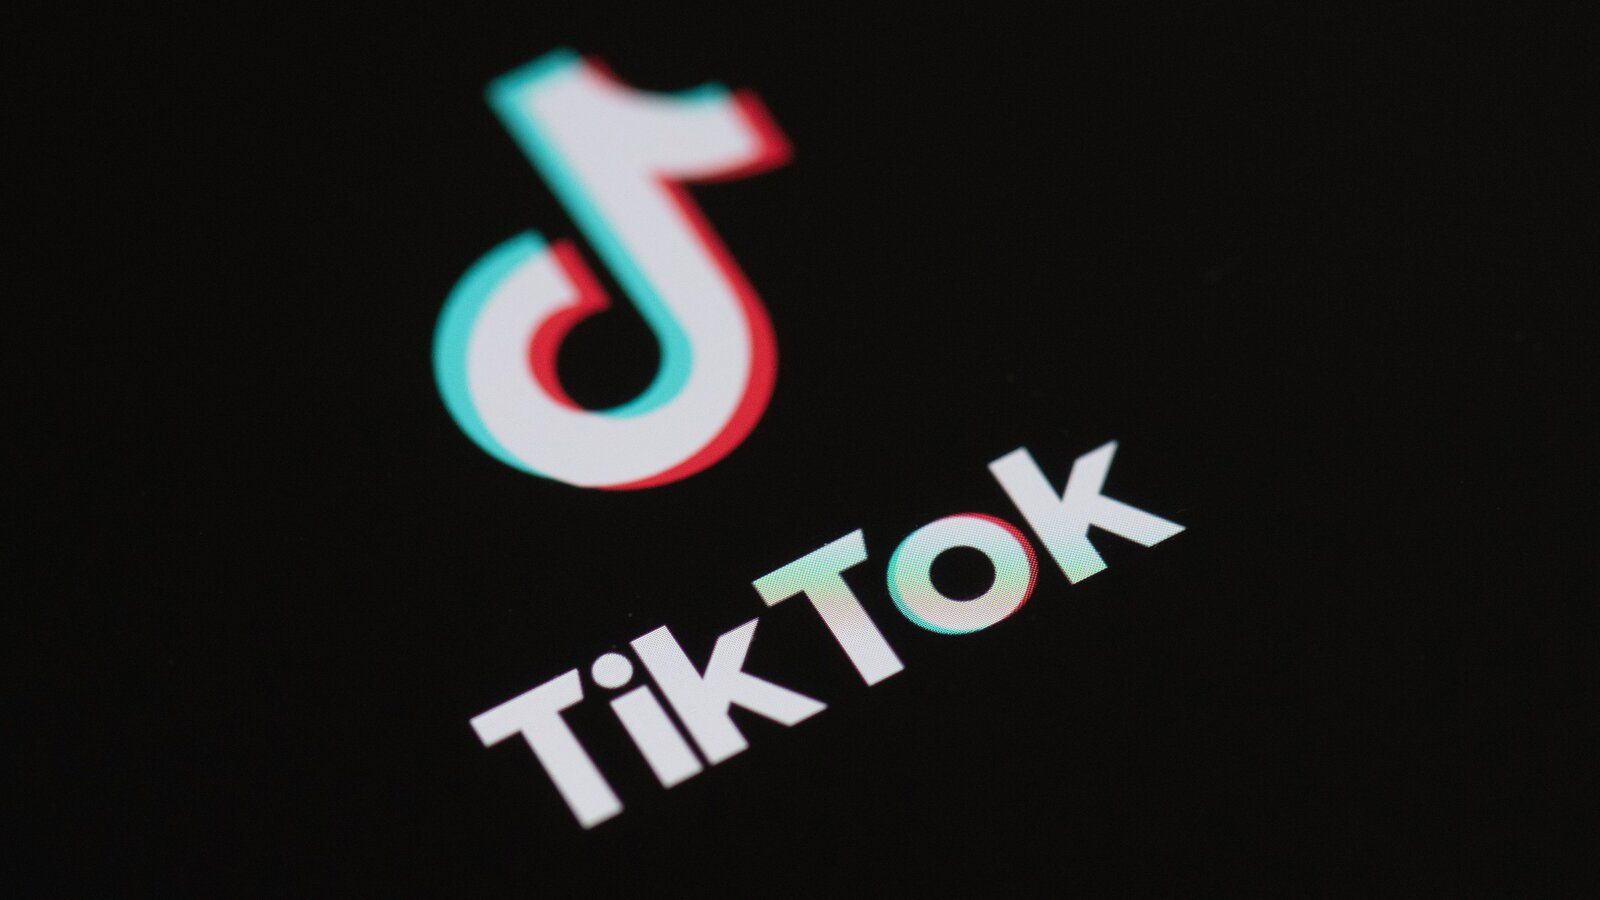 ByteDance Said to Offer to Sell TikTok's U.S. Operations